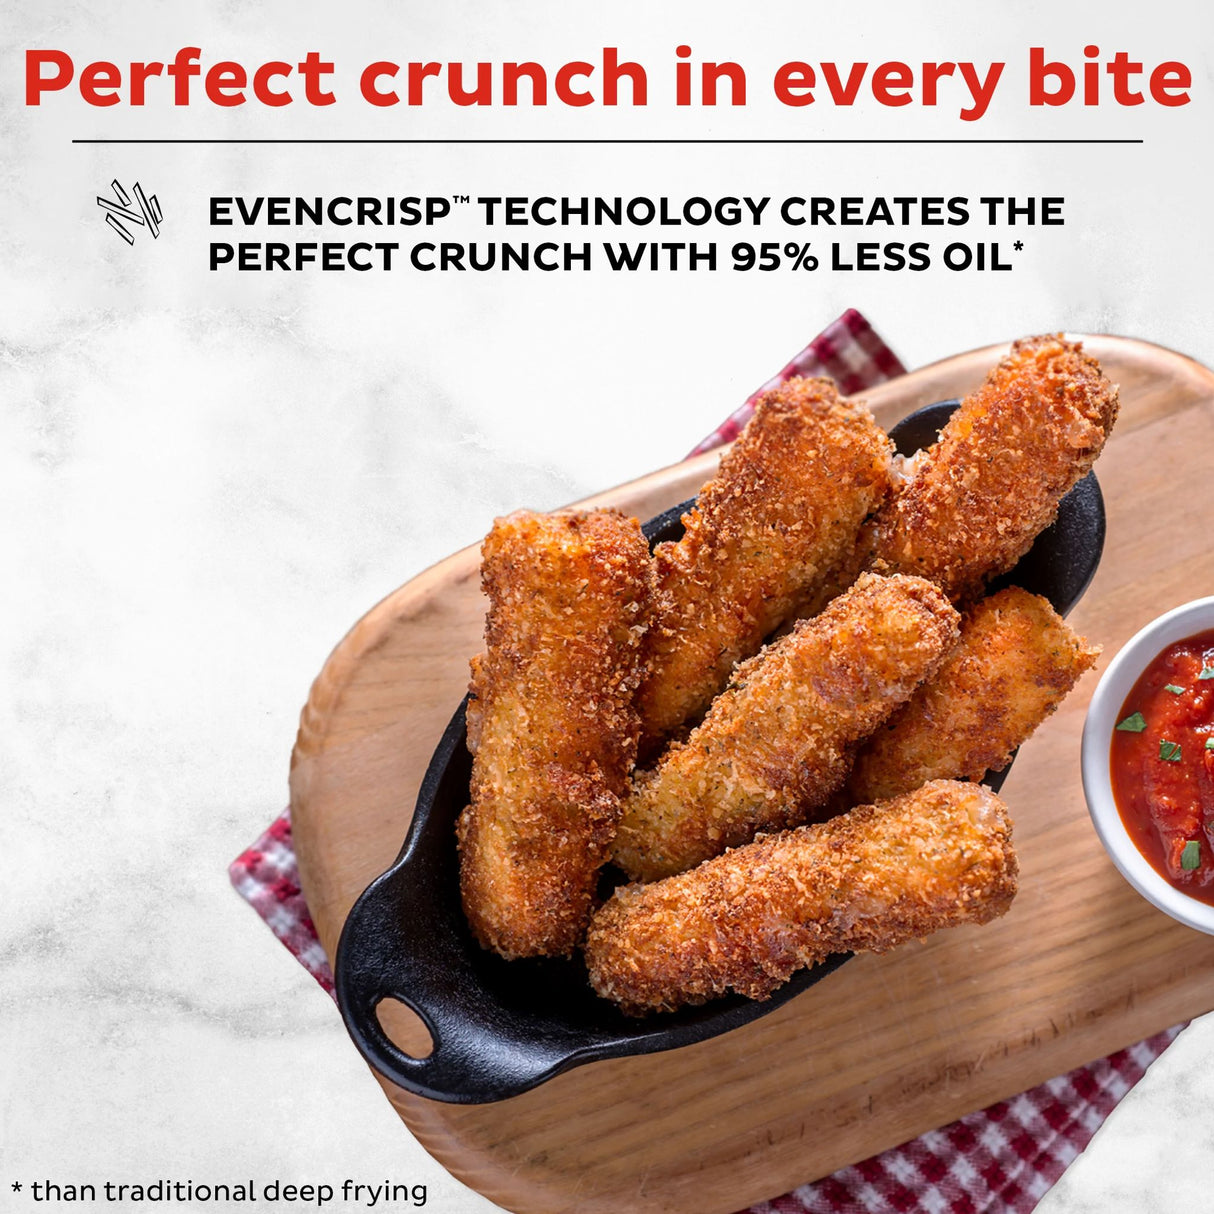  Instant Vortex Plus 10-quart Air Fryer Oven with text Perfect crunch in every bite